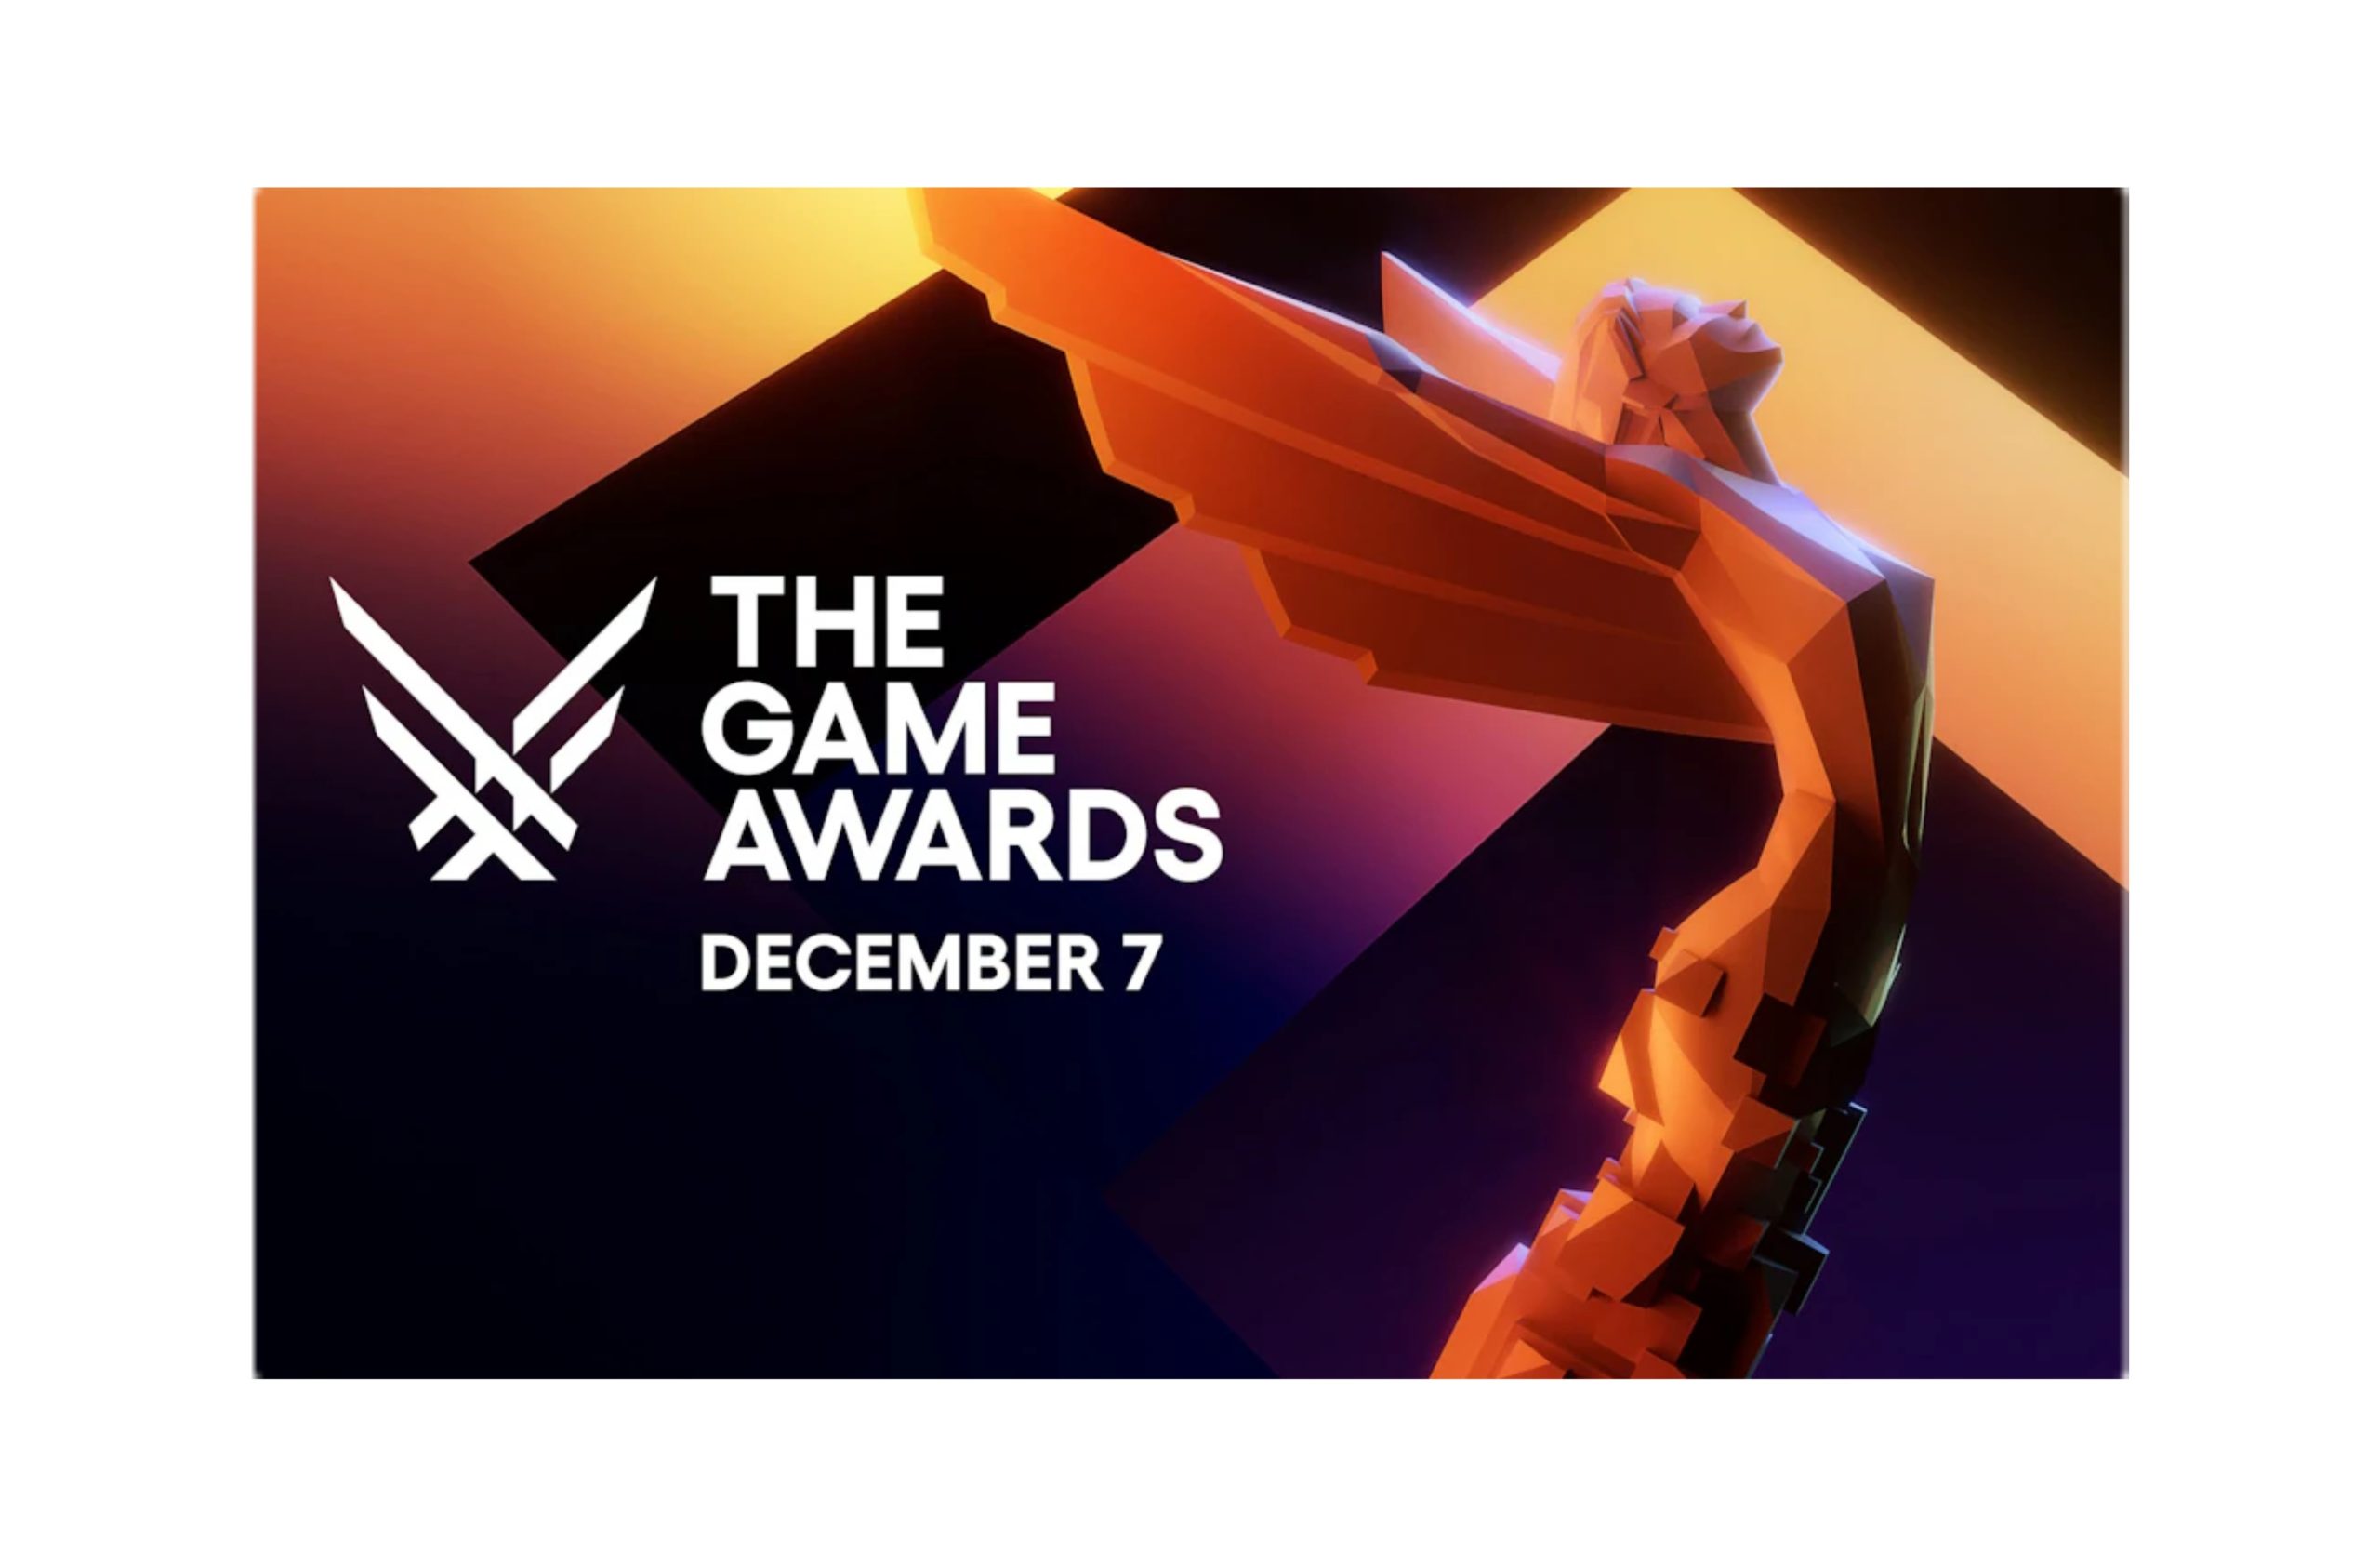 When is The Game Awards 2020 event and how to vote for game of the year  (GOTY)? - AS USA